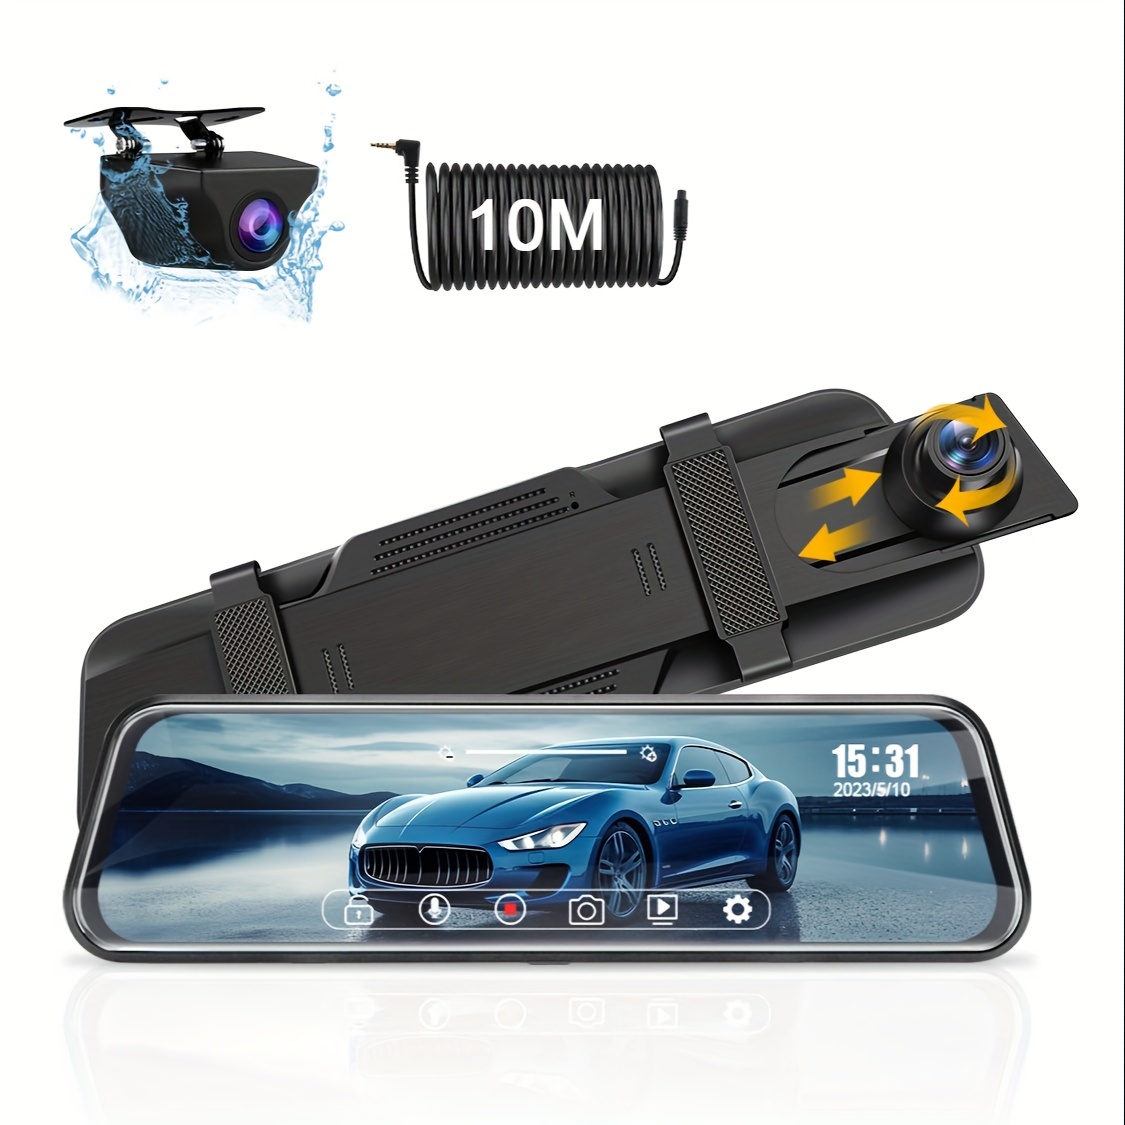 Intelligent Car Camera Security, 1080p HD Car Recorder with Gravity Sensor,  Built-in WiFi & App Control, Parking Monitor & Emergency Video Storage